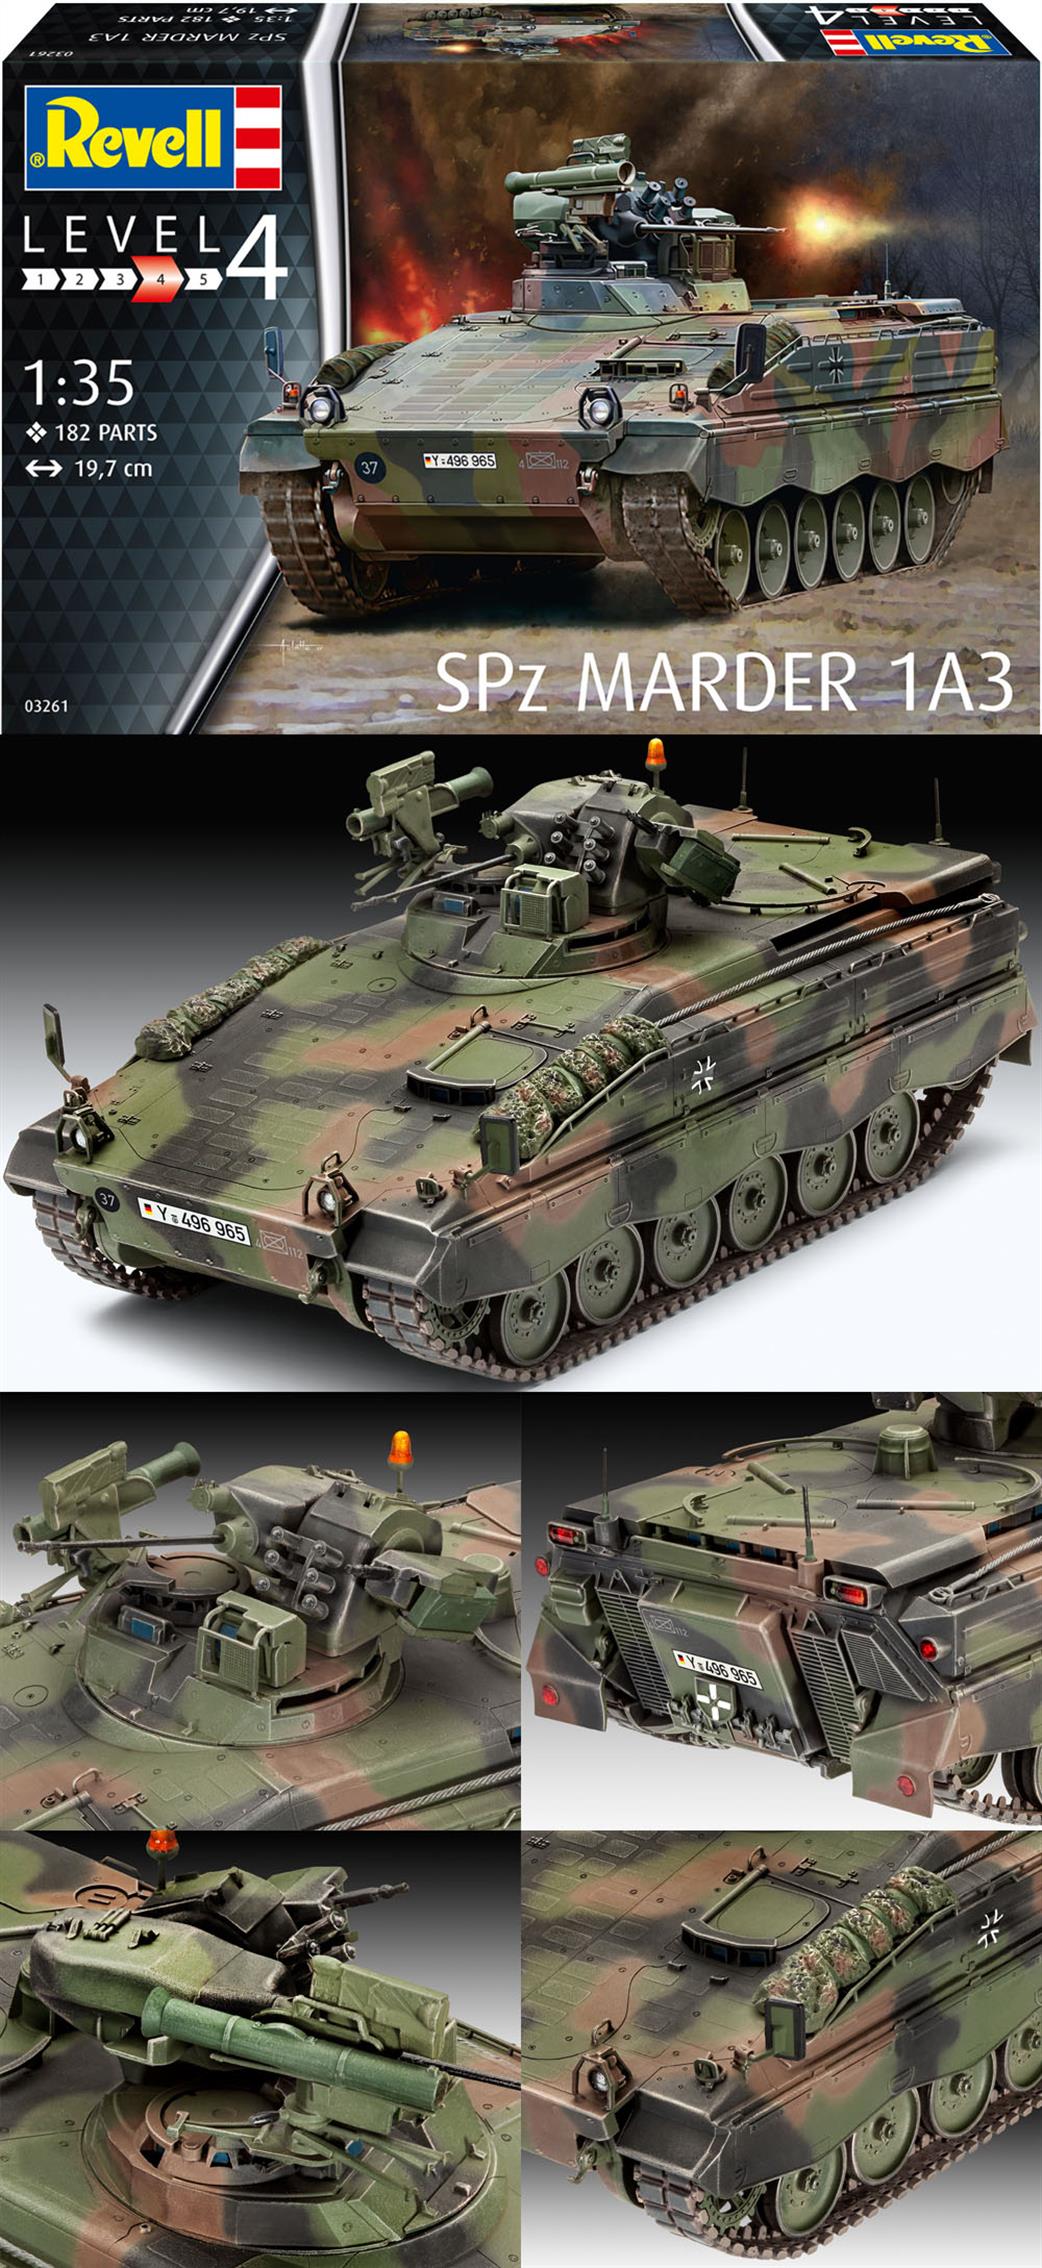 SPz Marder 1A3, Revell 03261 (2017)